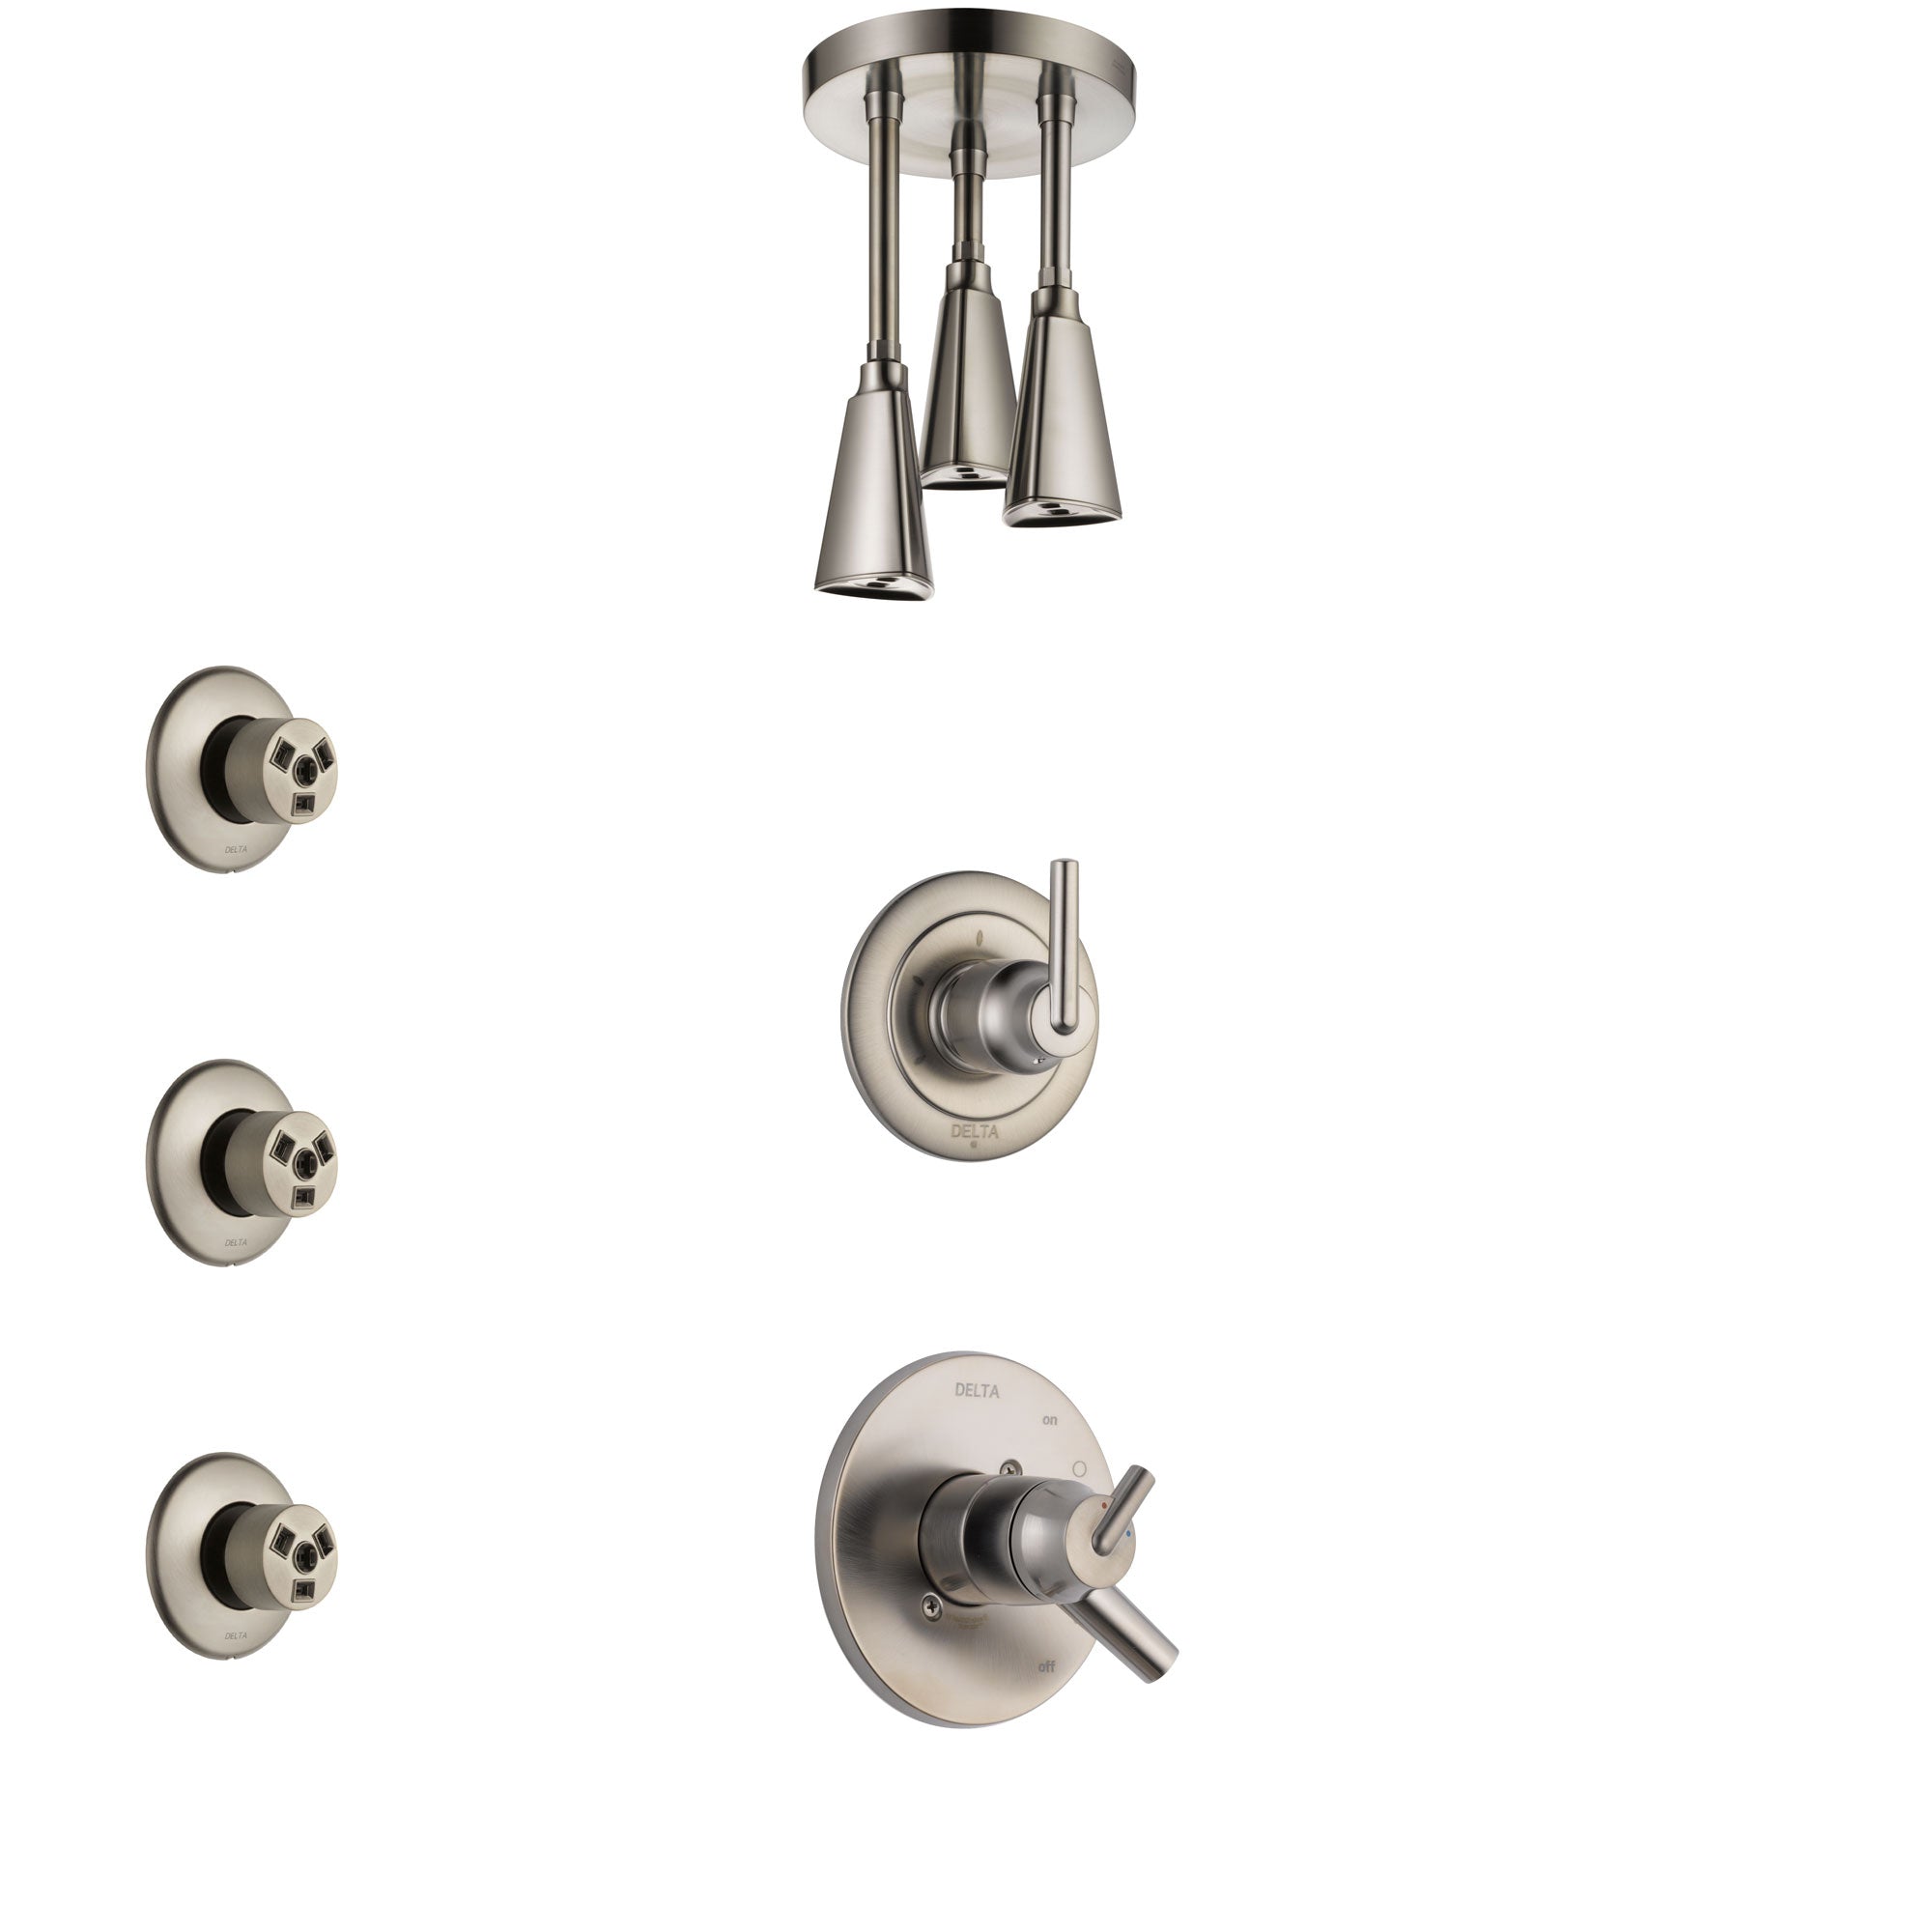 Delta Trinsic Stainless Steel Finish Shower System with Dual Control Handle, 3-Setting Diverter, Ceiling Mount Showerhead, and 3 Body Sprays SS1759SS7